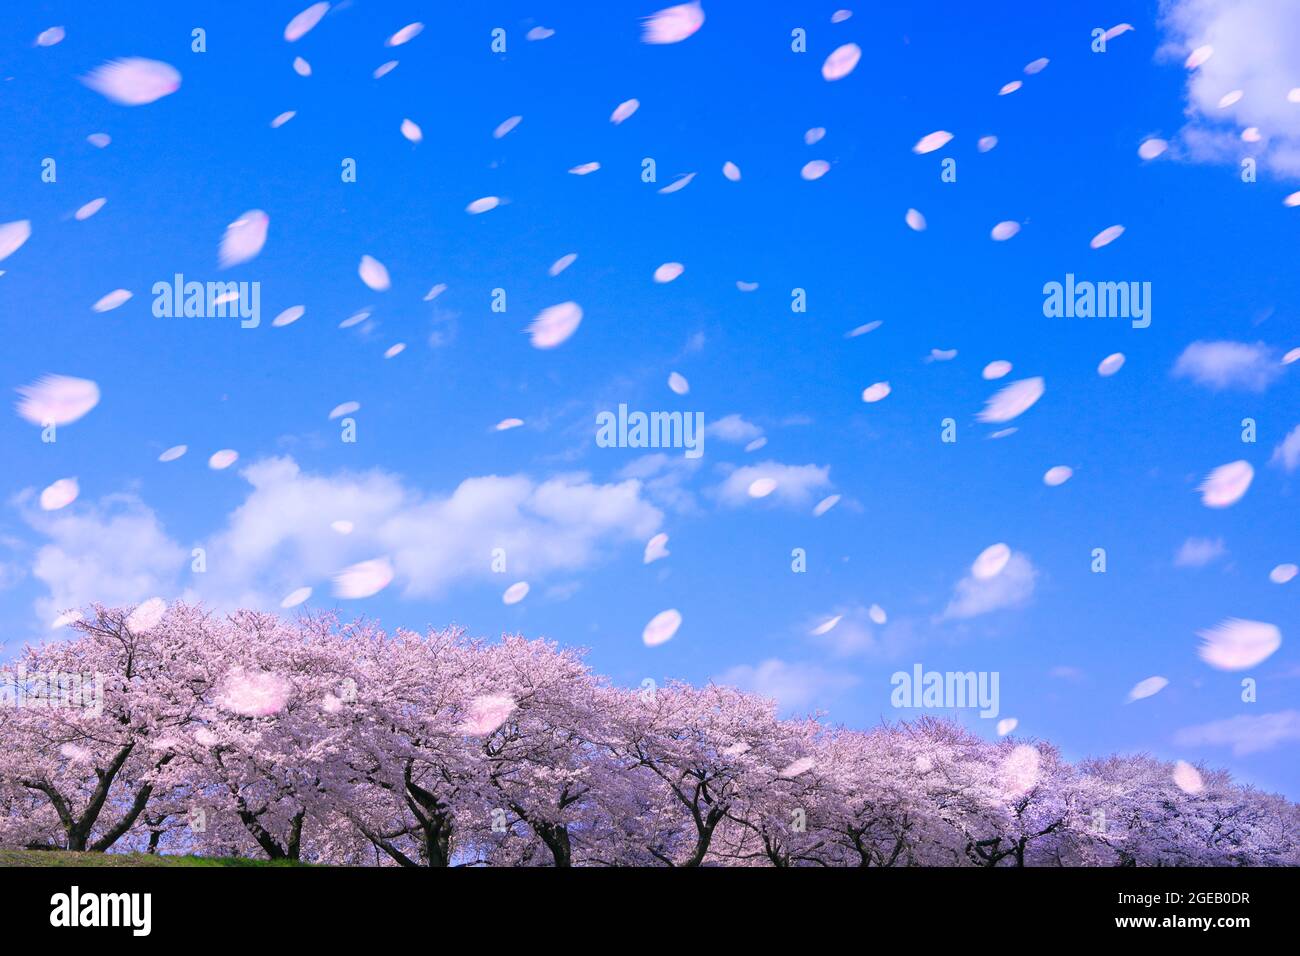 Blooming cherry blossoms Stock Photo